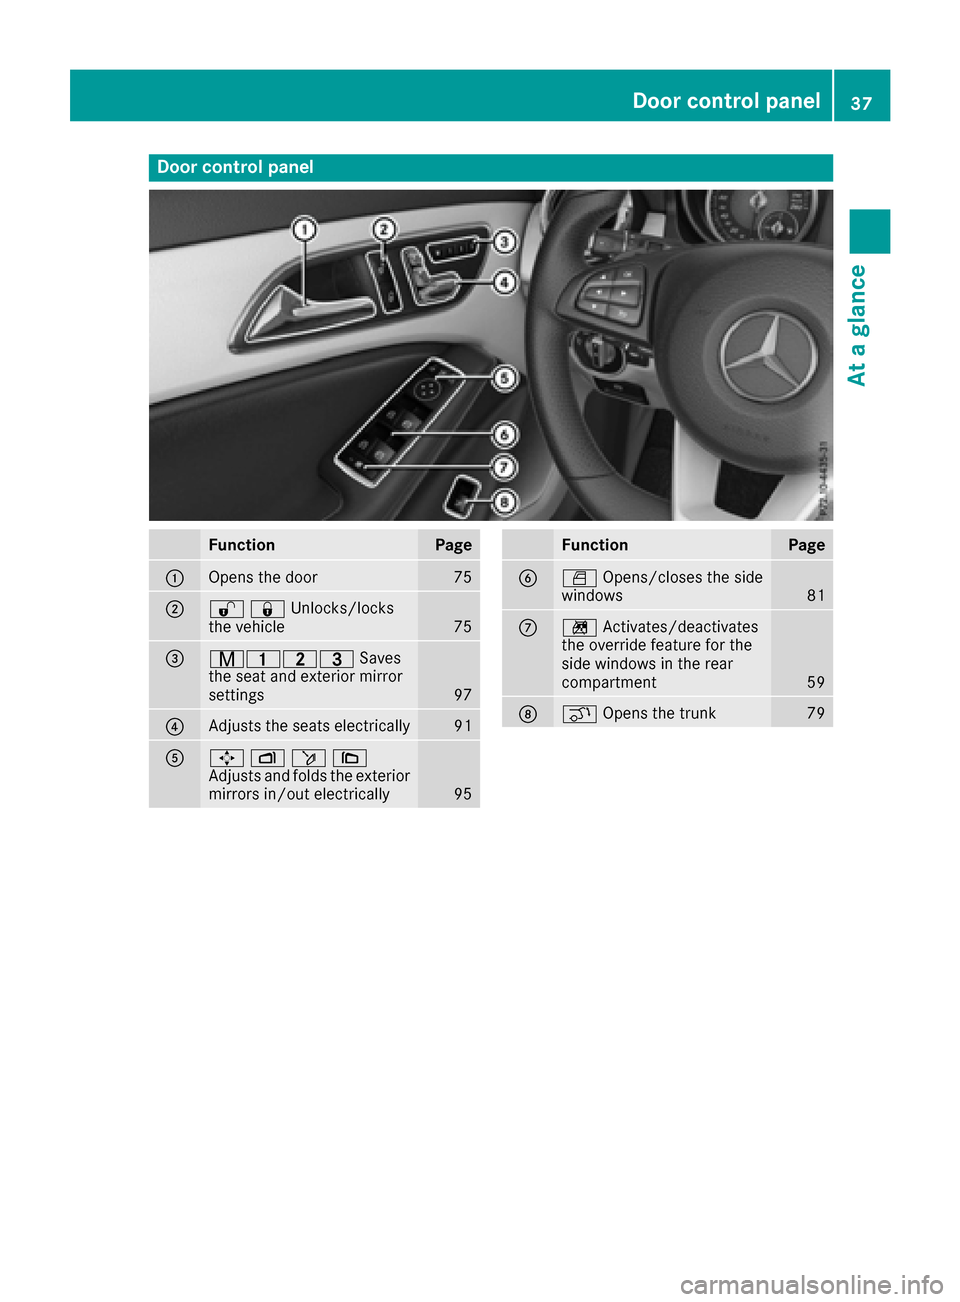 MERCEDES-BENZ CLA-Class 2017 C117 Owners Manual Door controlpanel
FunctionPage
:Opens th edoo r75
;%&Unlocks/locks
the vehicle75
=r45= Saves
the seat and exterior mirror
settings
97
?Adjusts the seats electrically91
A7 Zö\
Adjusts and folds the ex